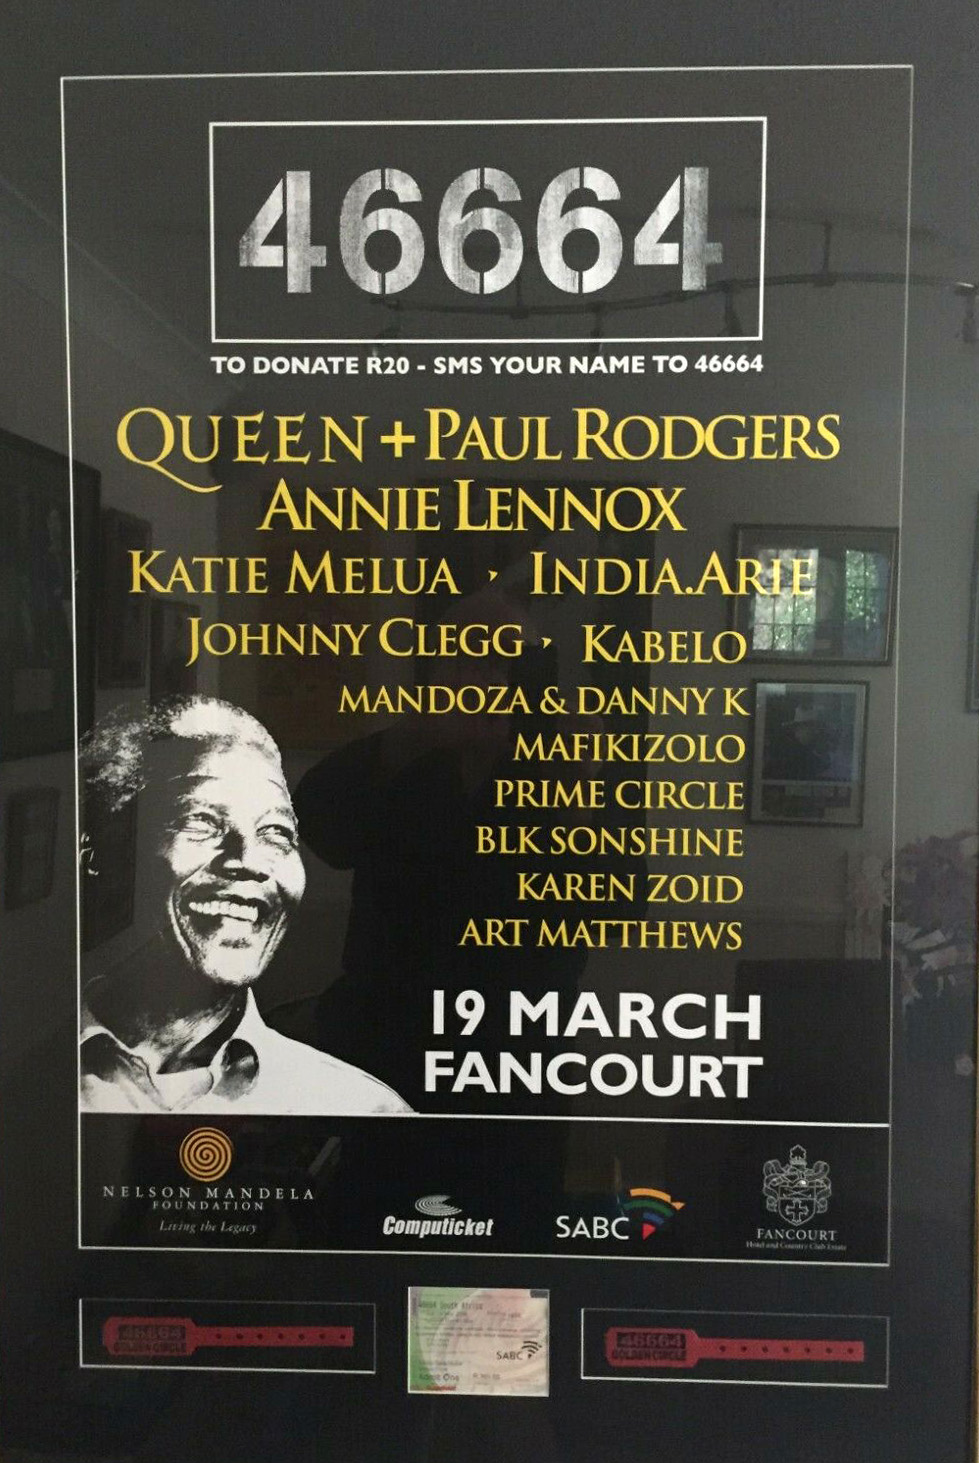 46664 poster - Fancourt, George, South Africa